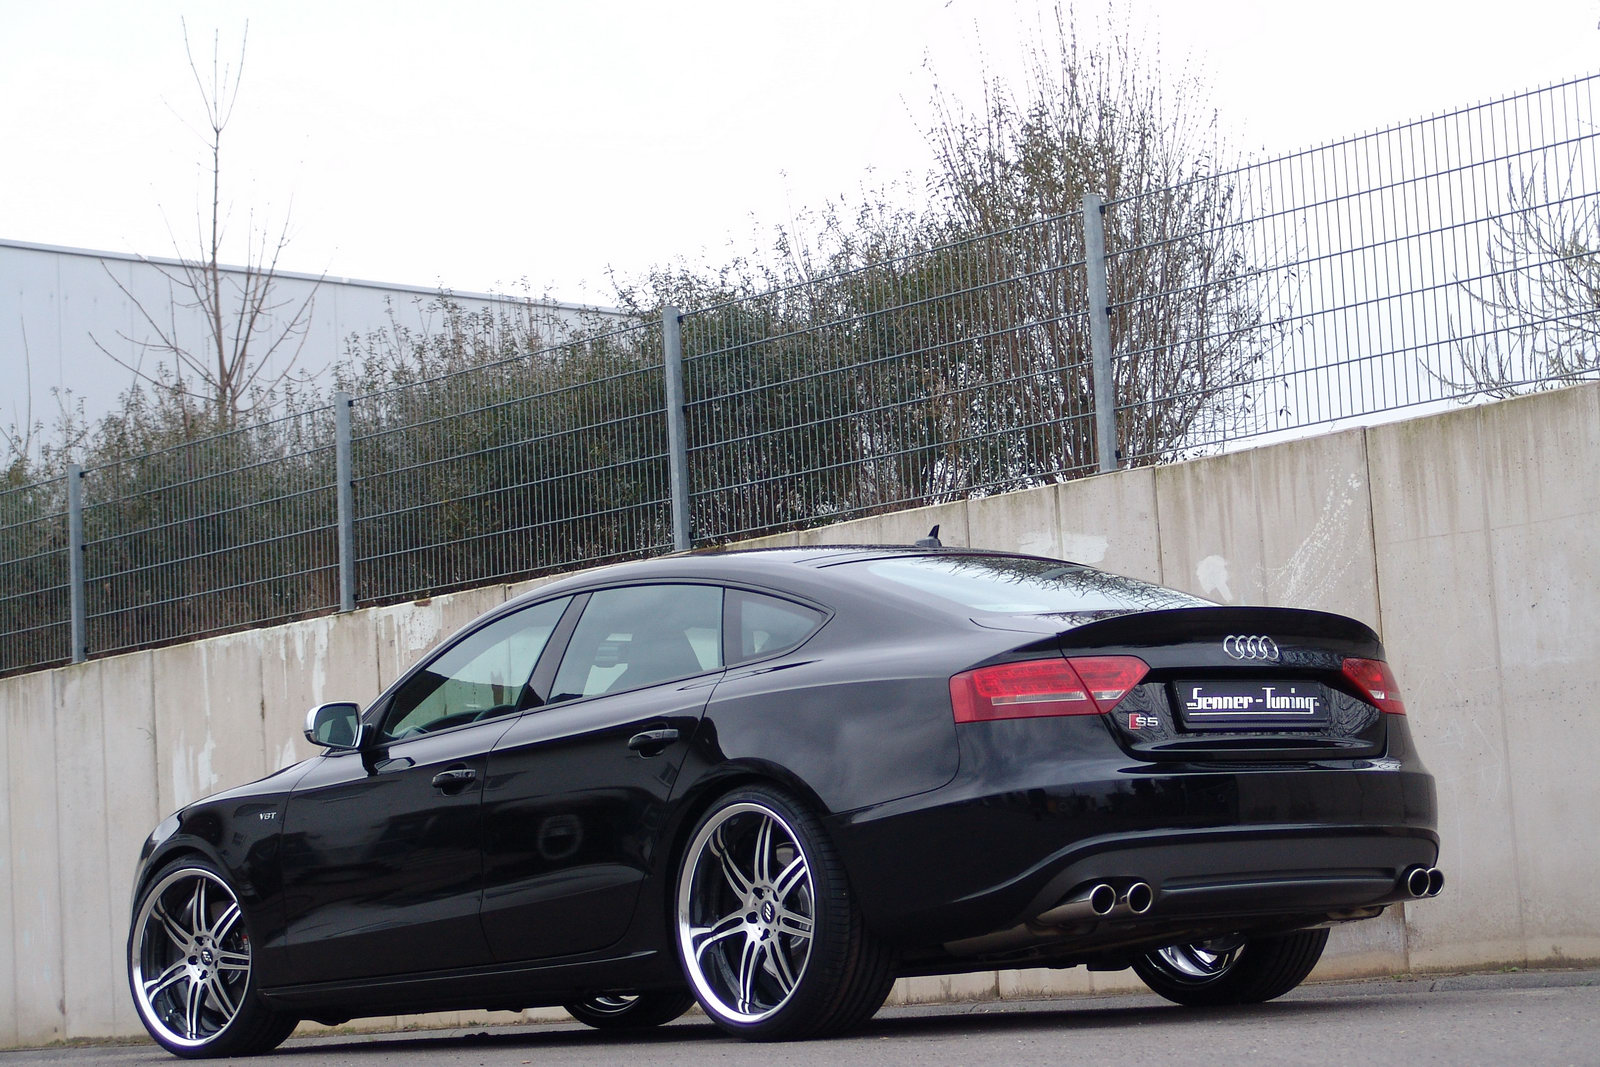 Audi S5 Sportback by Senner Tuning